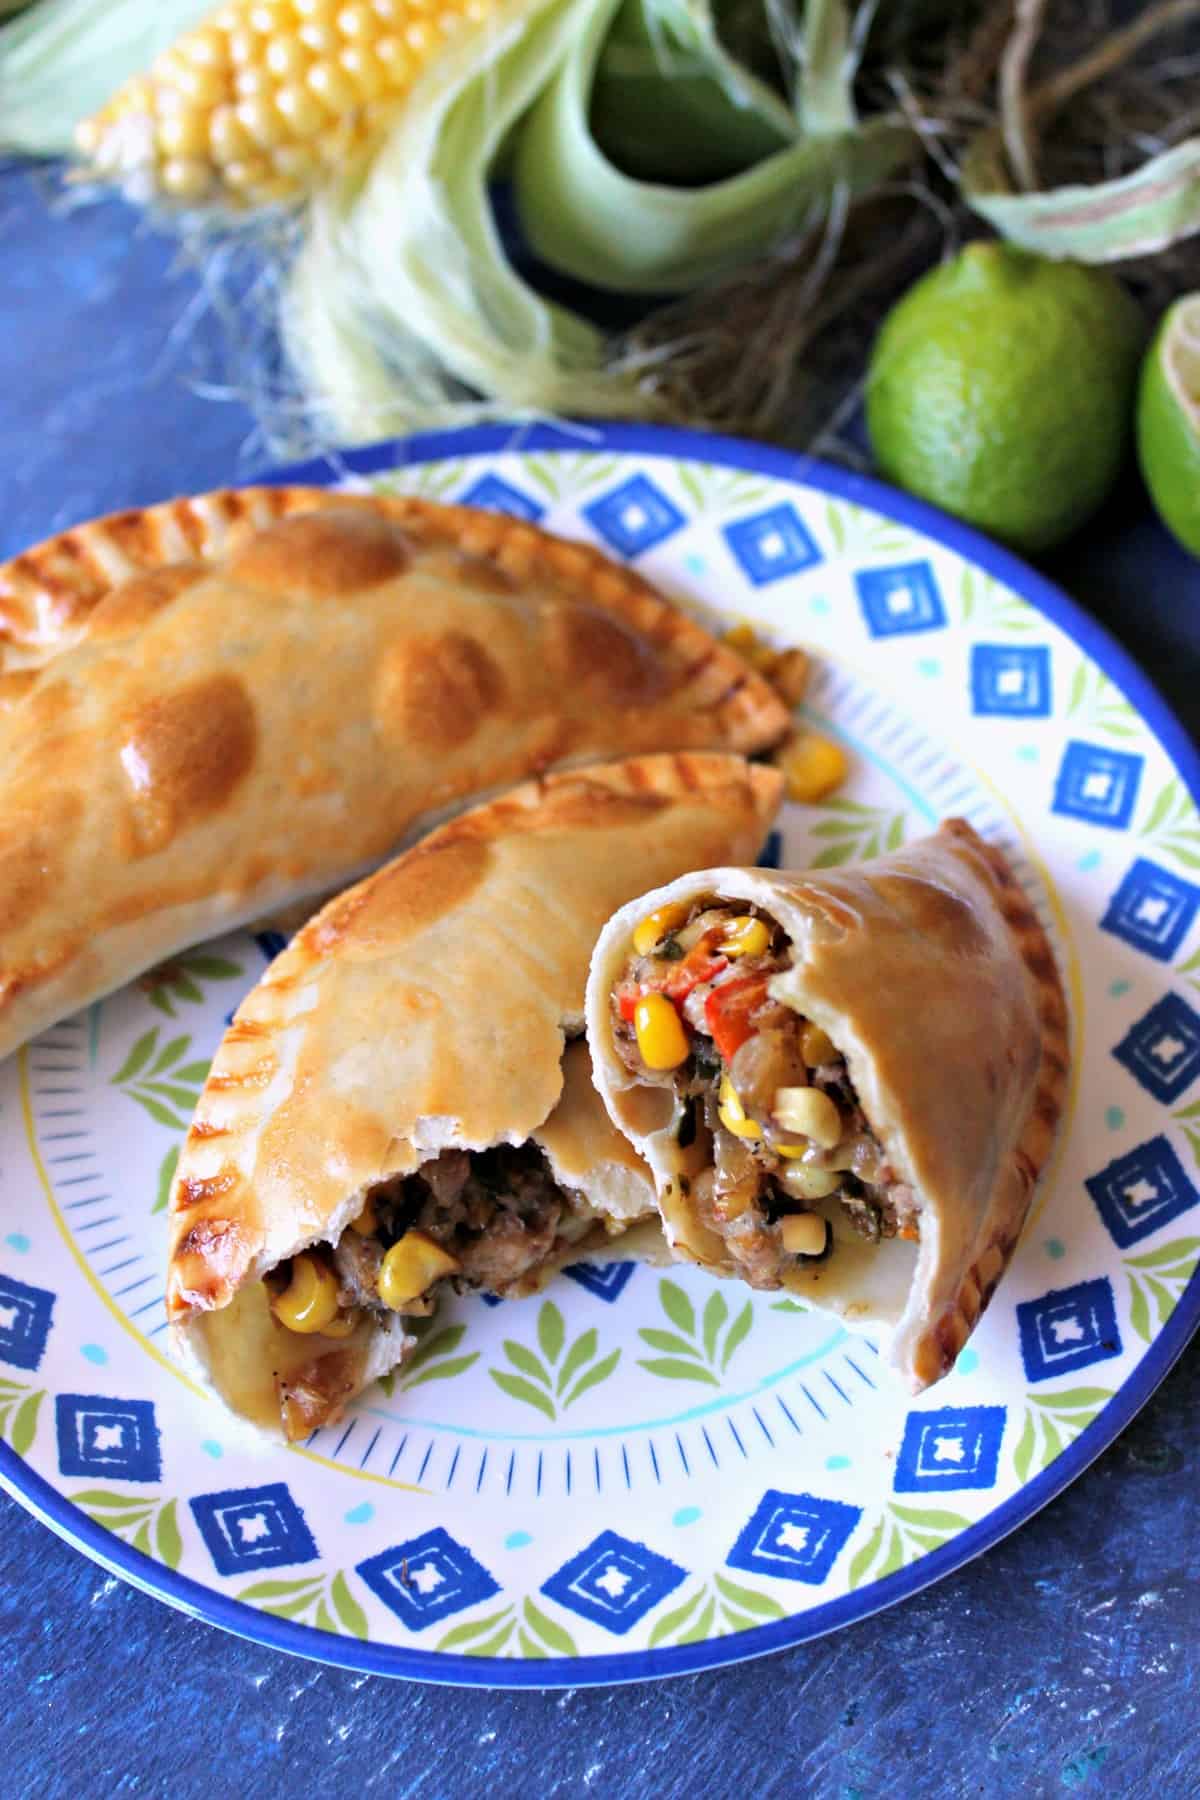 Need a new way to use up that summer sweet corn? These Baked Crab and Corn Empanadas are a handheld savory snack that's bursting with flavor and fun to eat! Baked instead of fried, they're a lightened up version of a classic Latin American bite.  